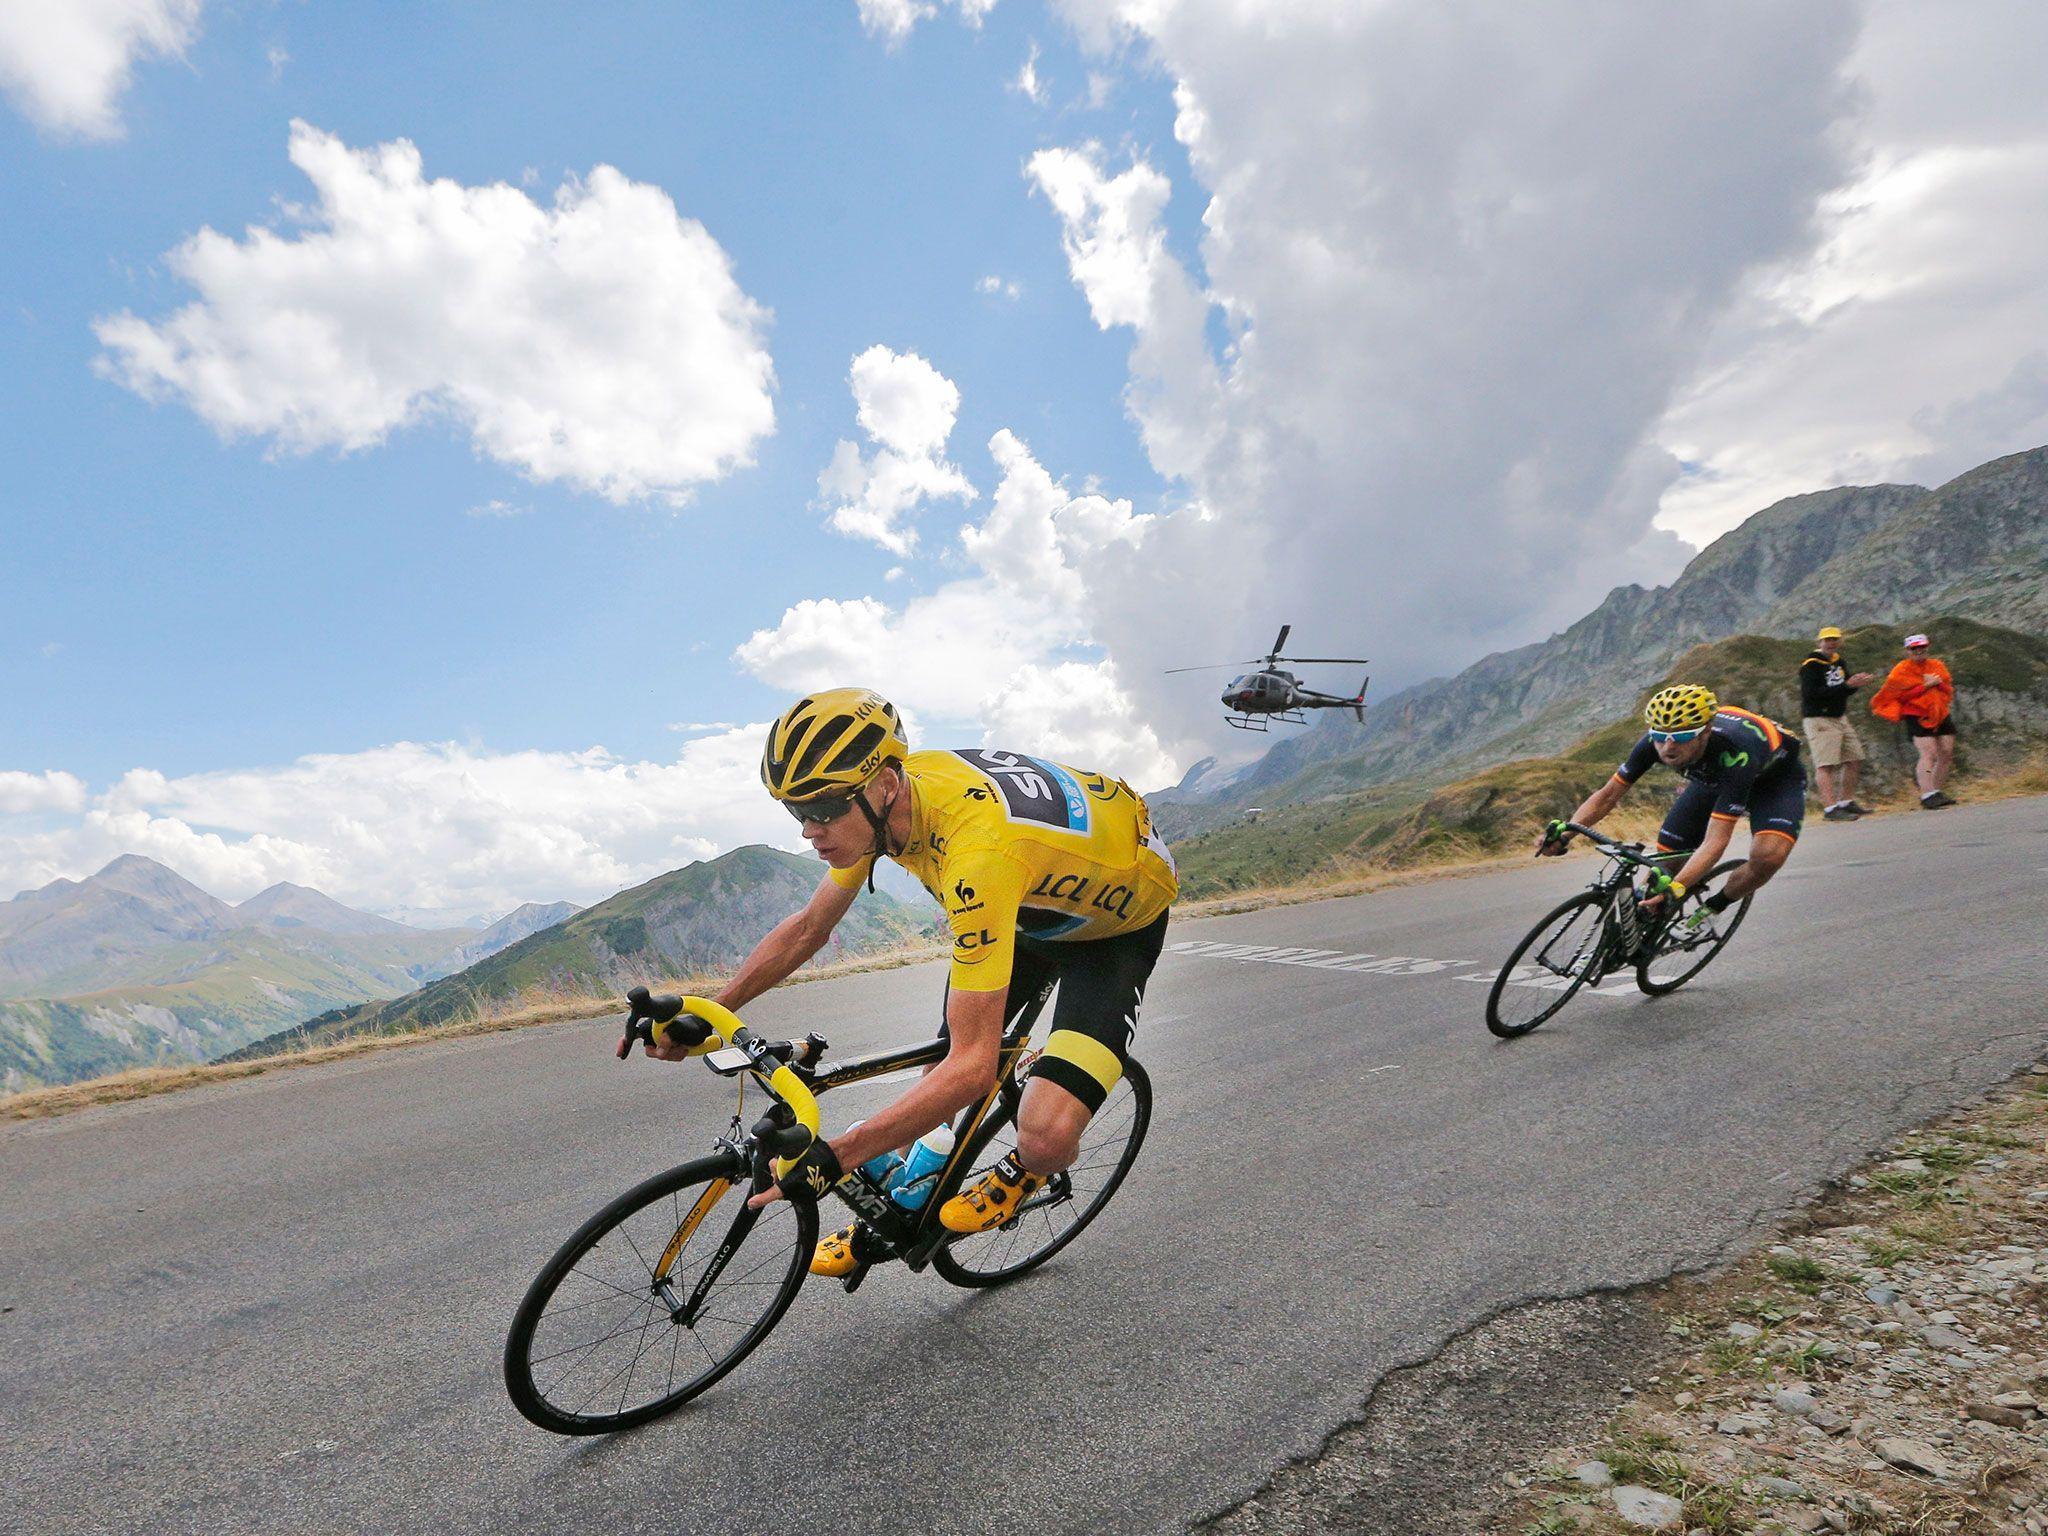 Tour de France 2015: Chris Froome survives frantic day to keep